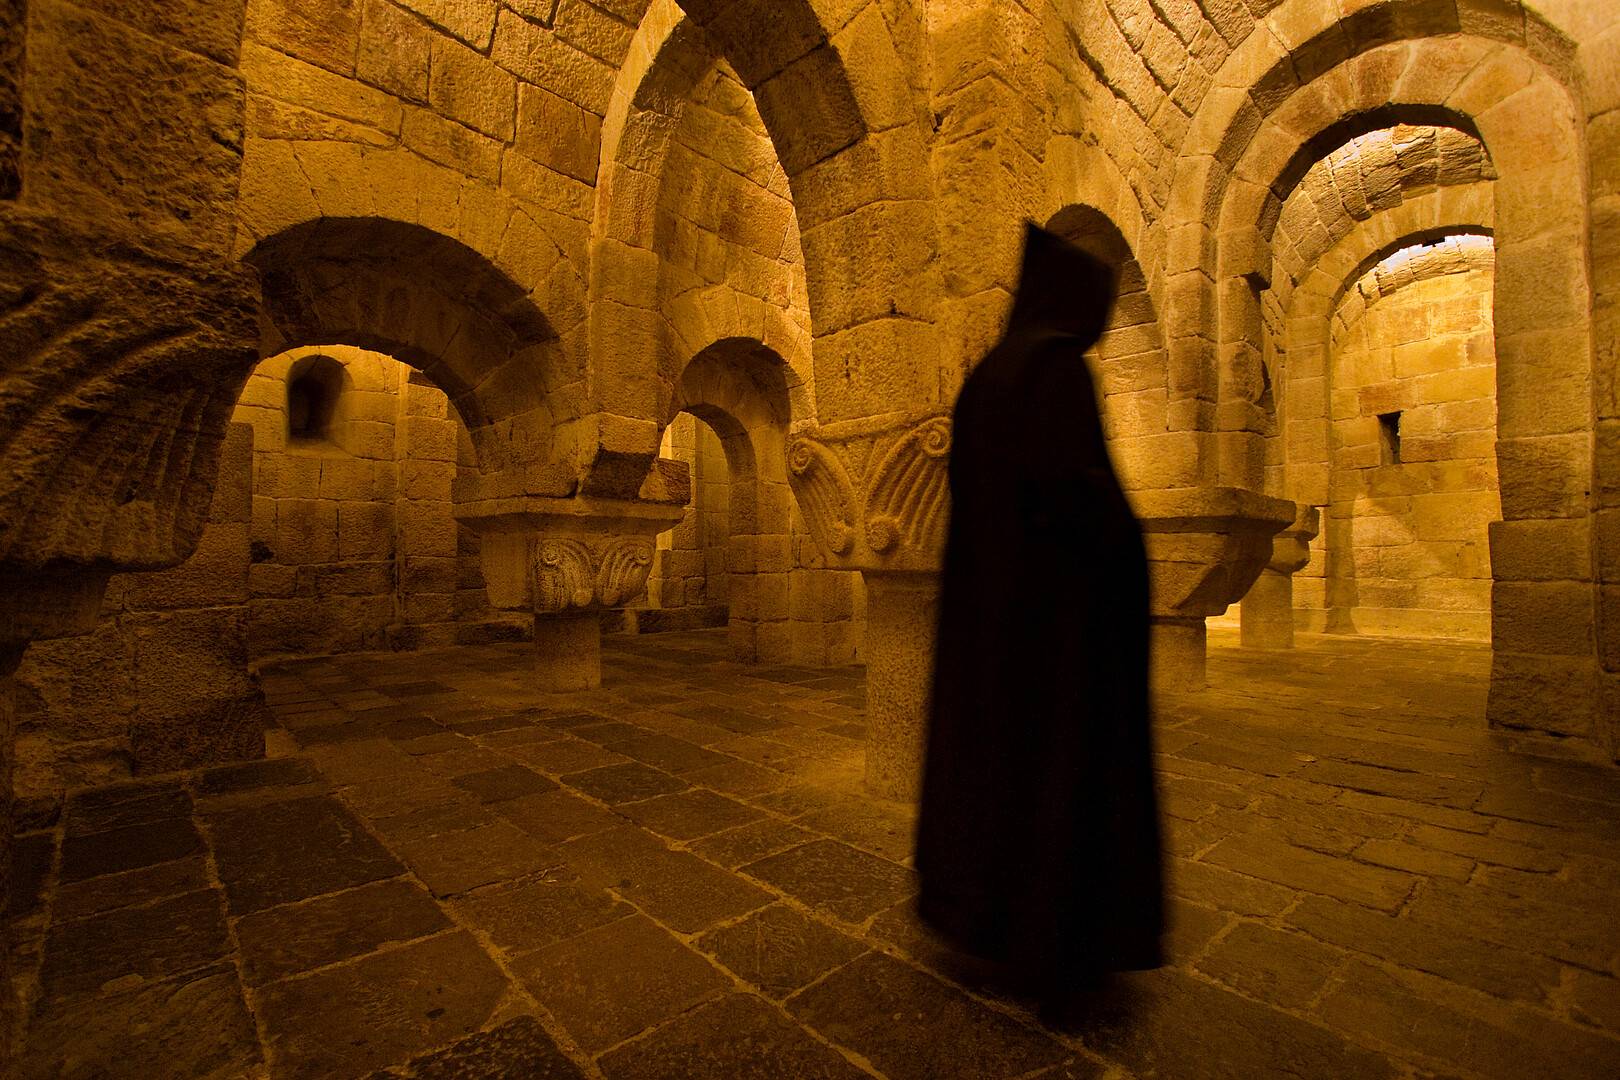 Monk in the Crypt of the Monastery of Leyre